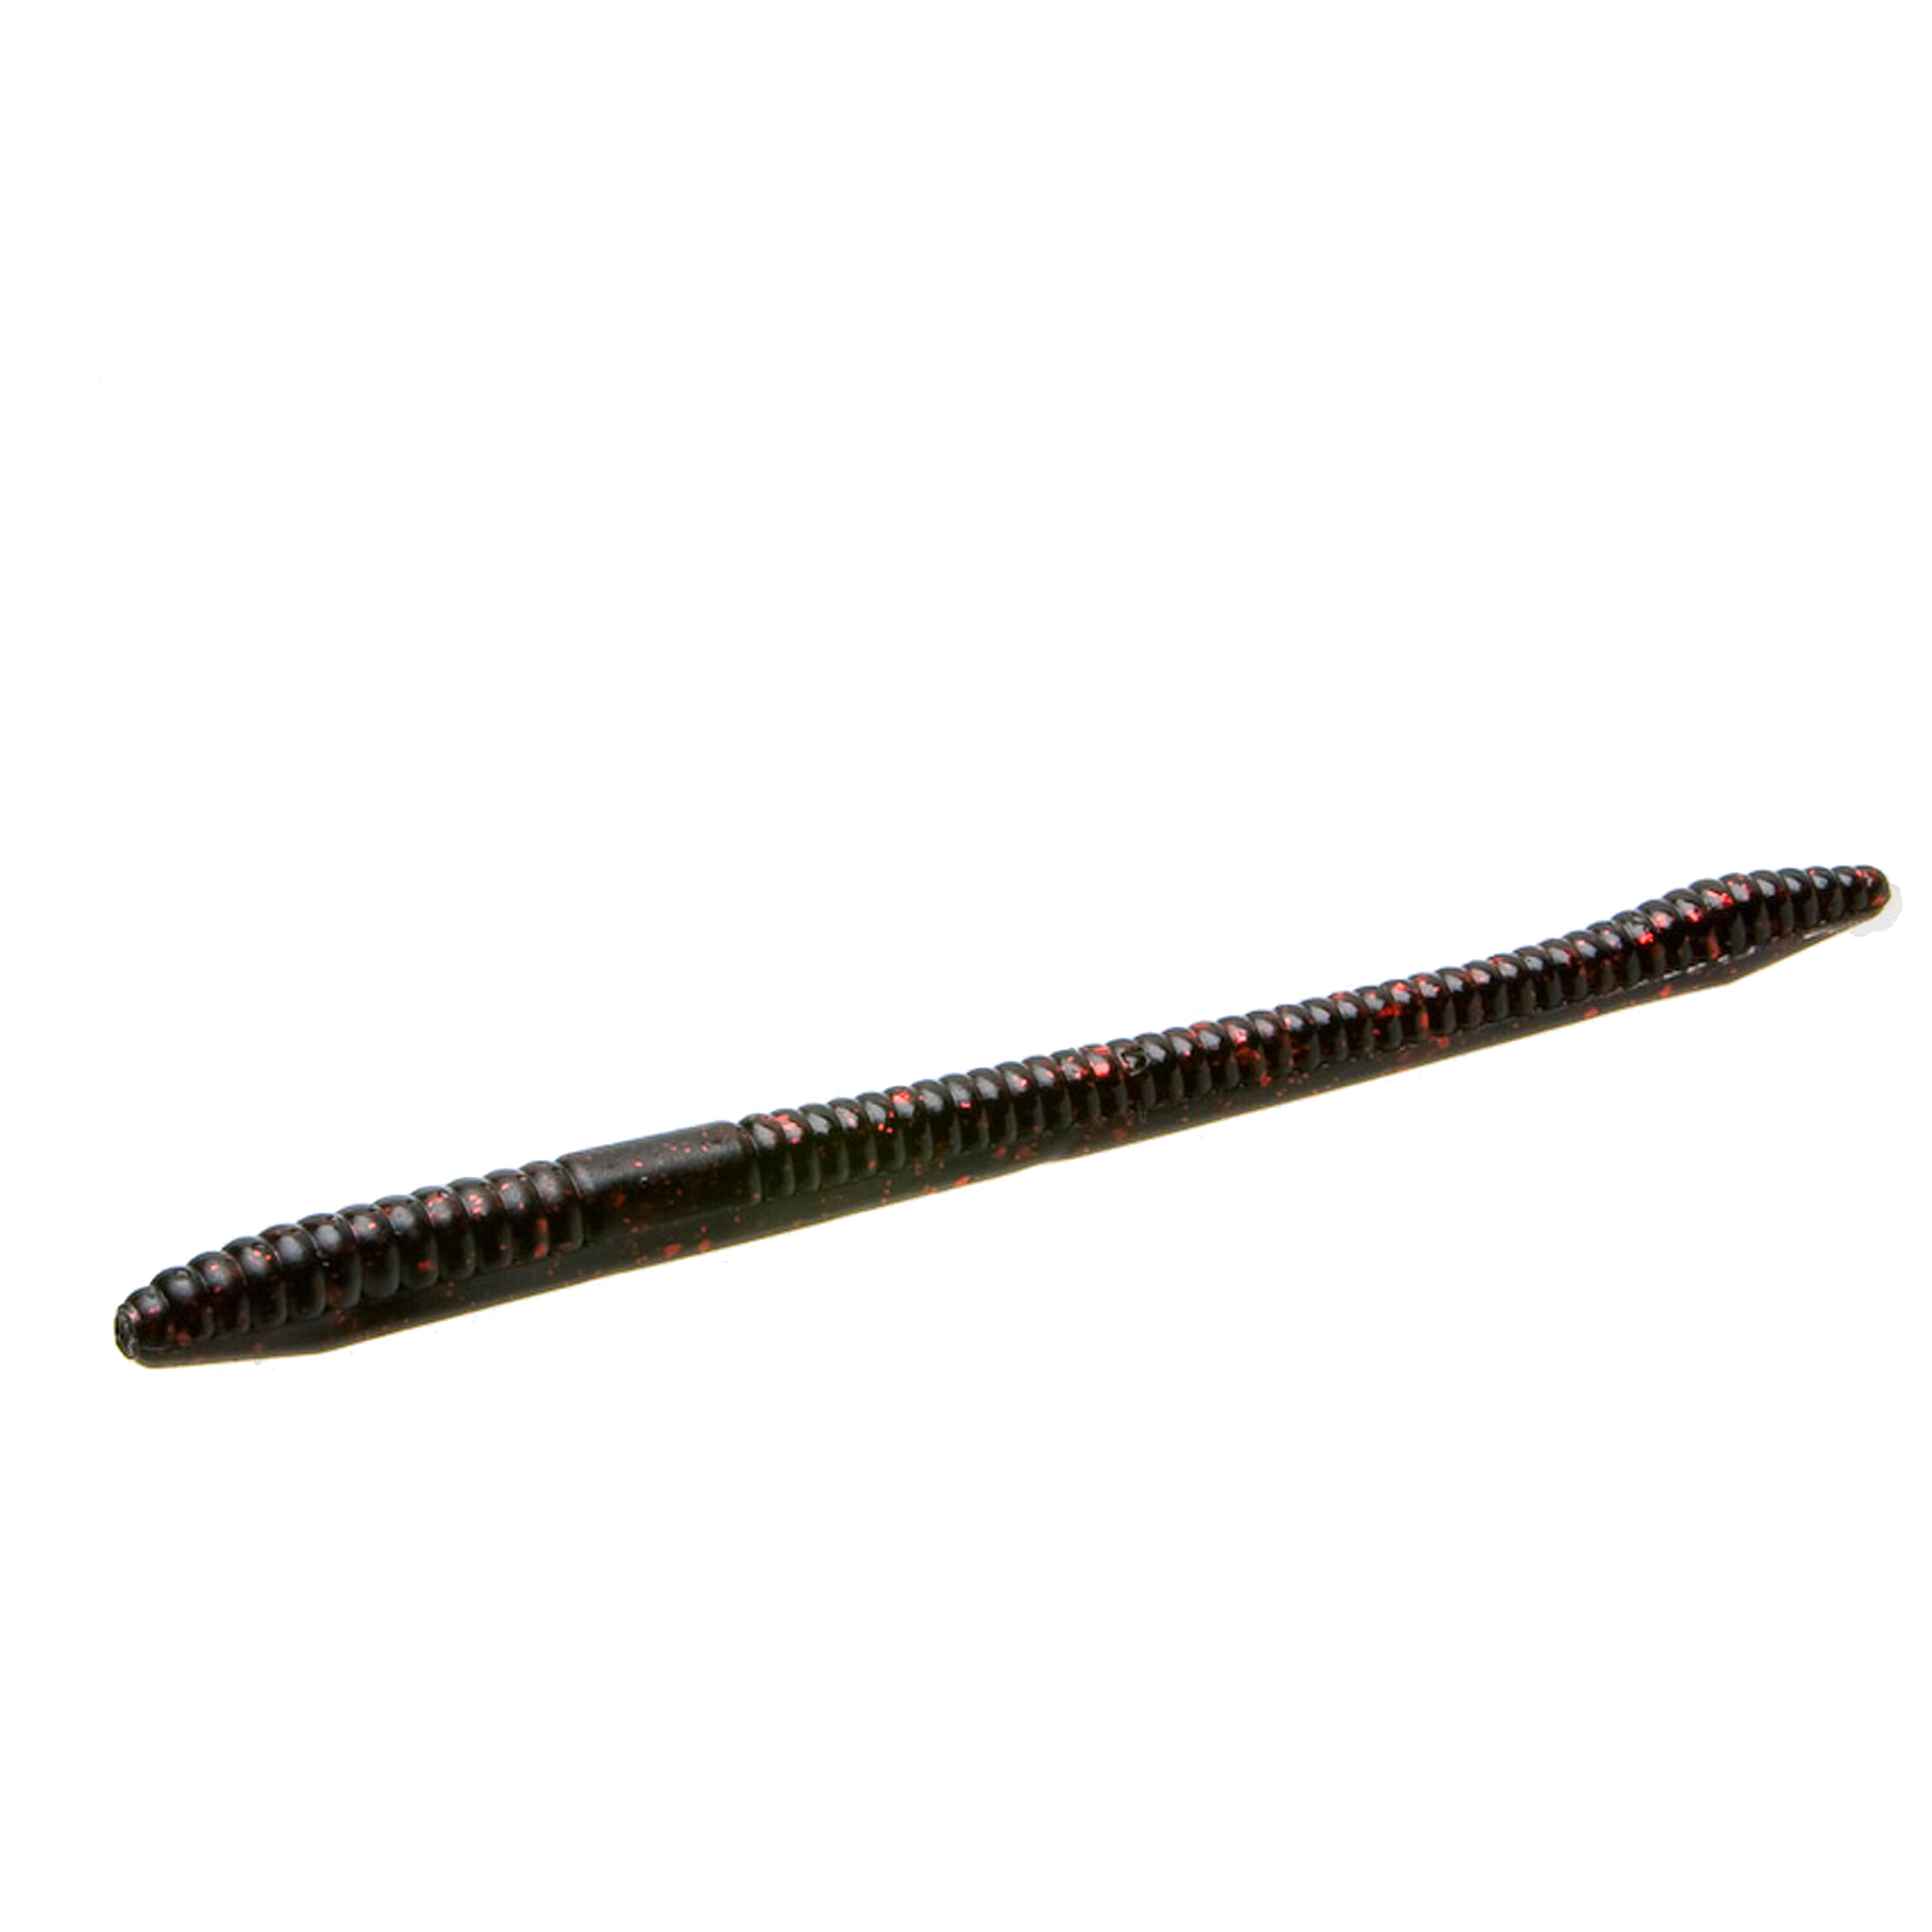 FINESSE WORM BLACK & RED BASS FISHING SOFT LURE 1/1